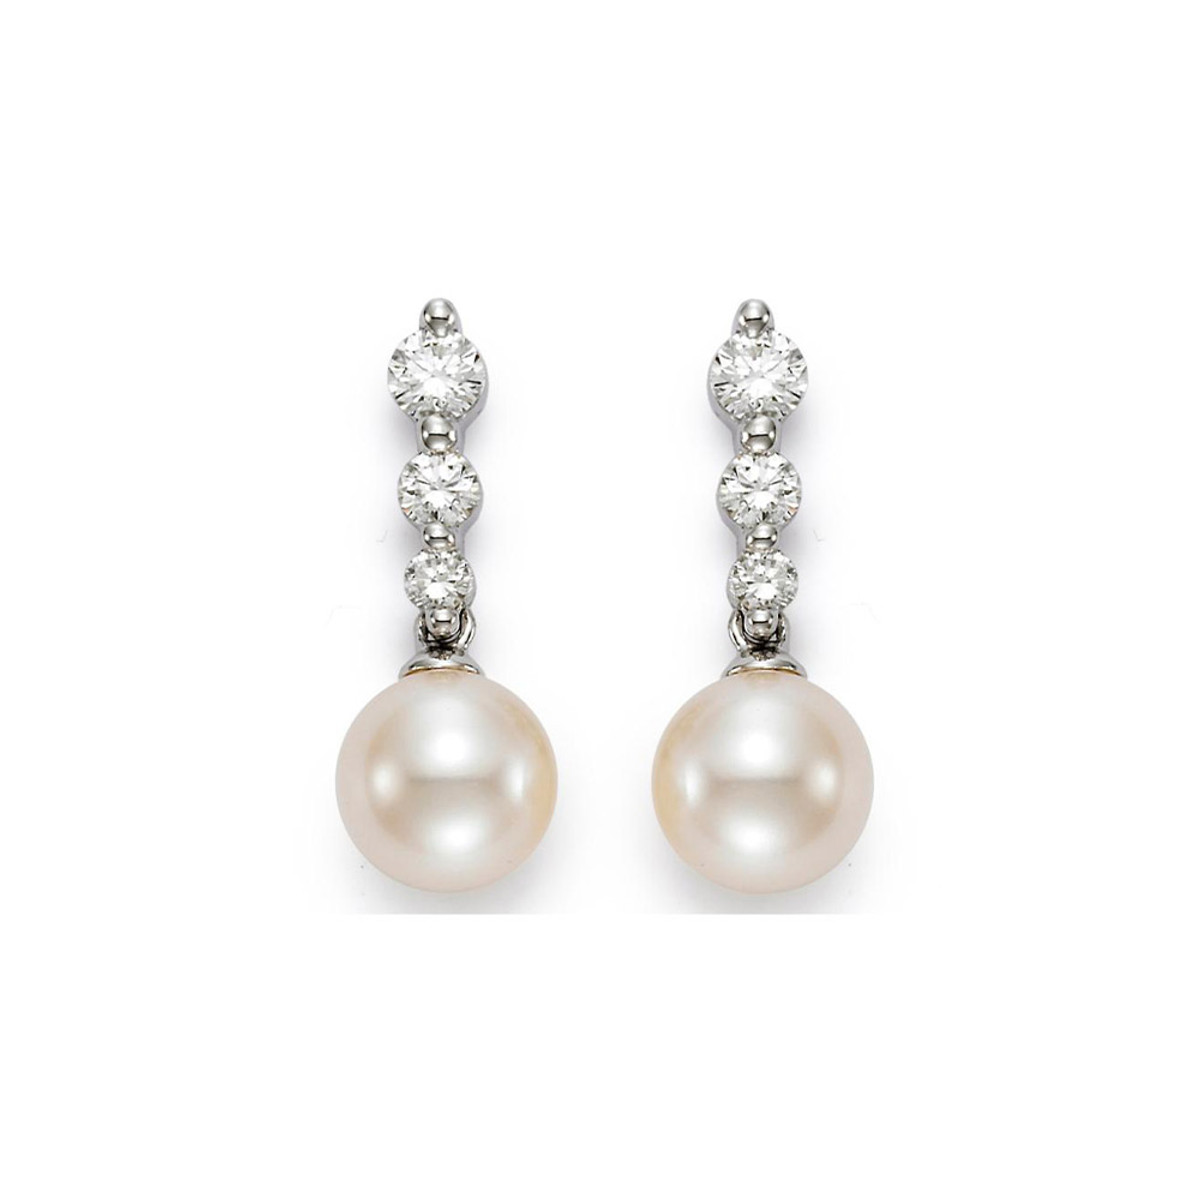 Hyde Park Collection 18K White Gold Pearl and Diamond Earrings-58176 Product Image